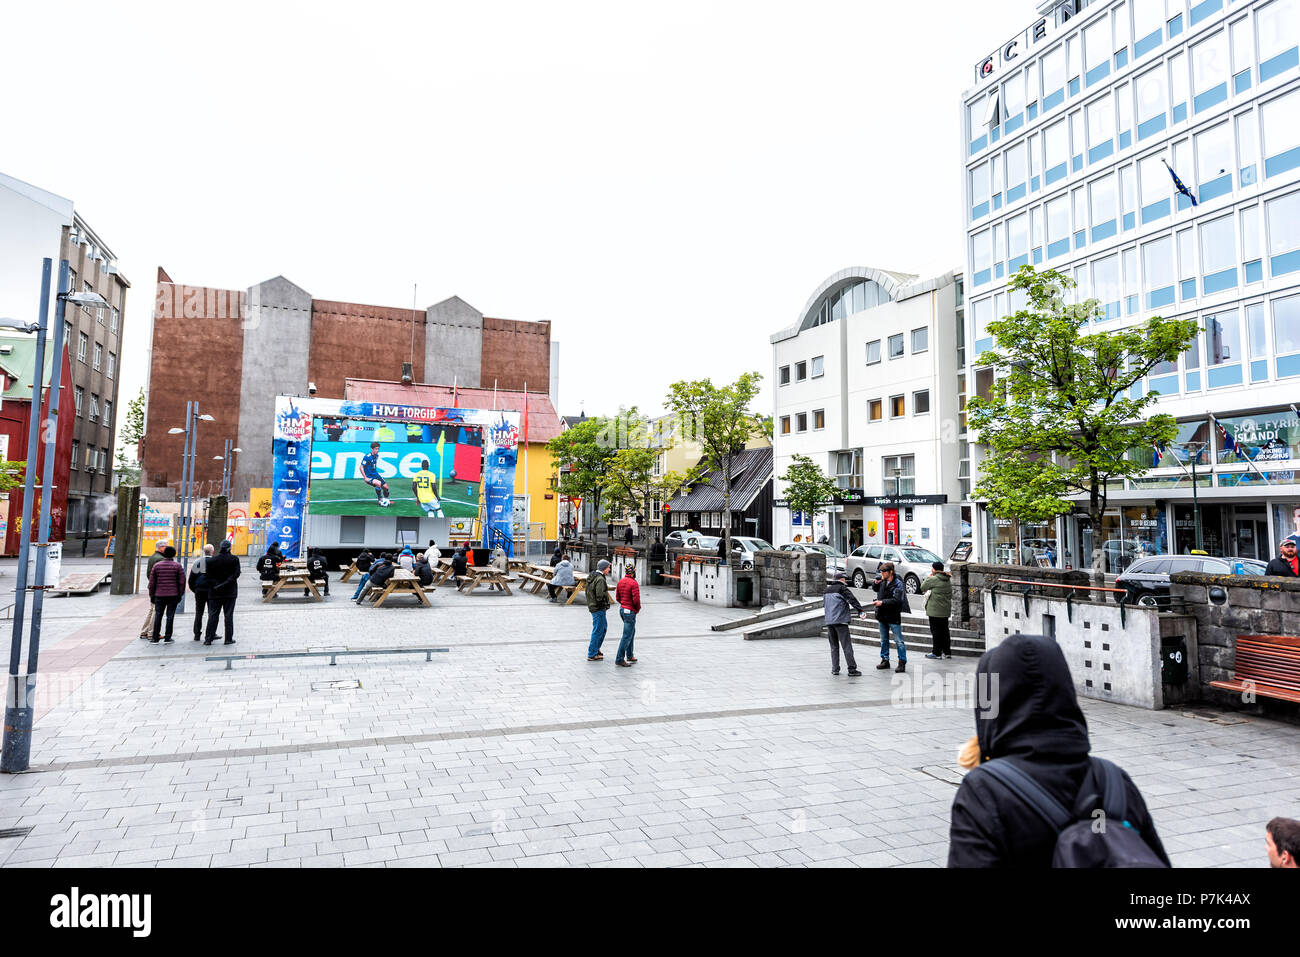 Reykjavik, Iceland - June 19, 2018: Ingolfur Ingolfstorg Square, with signs for HM Torgid, large screen tv television, people watching world cup FIFA  Stock Photo